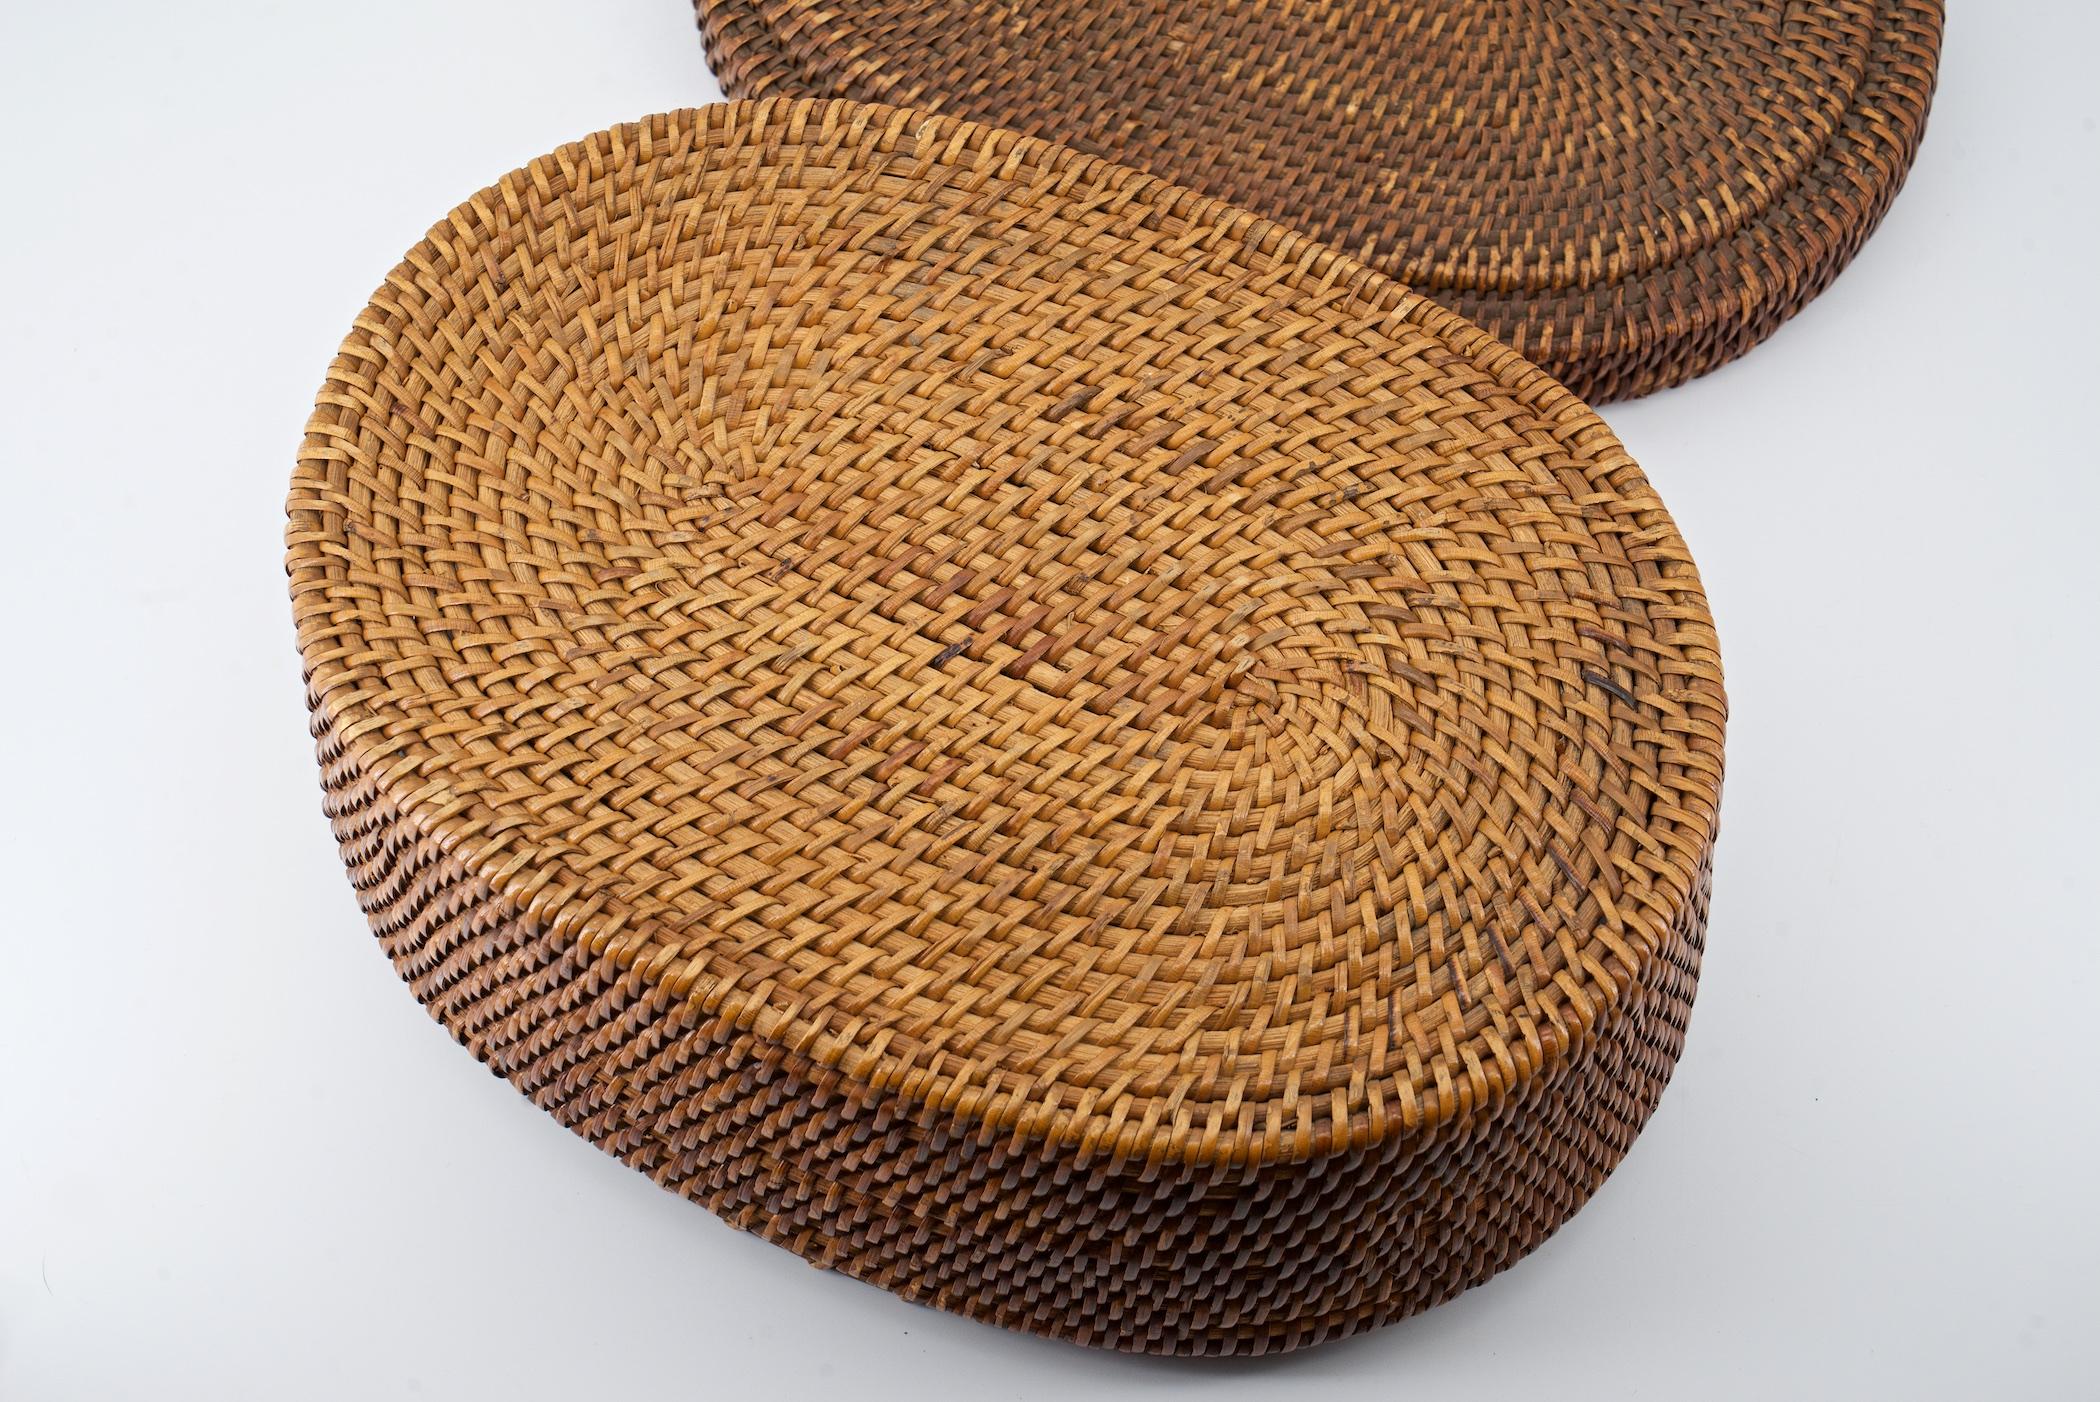 Native American Indian Woven Coiled Lidded Oval Basket 2